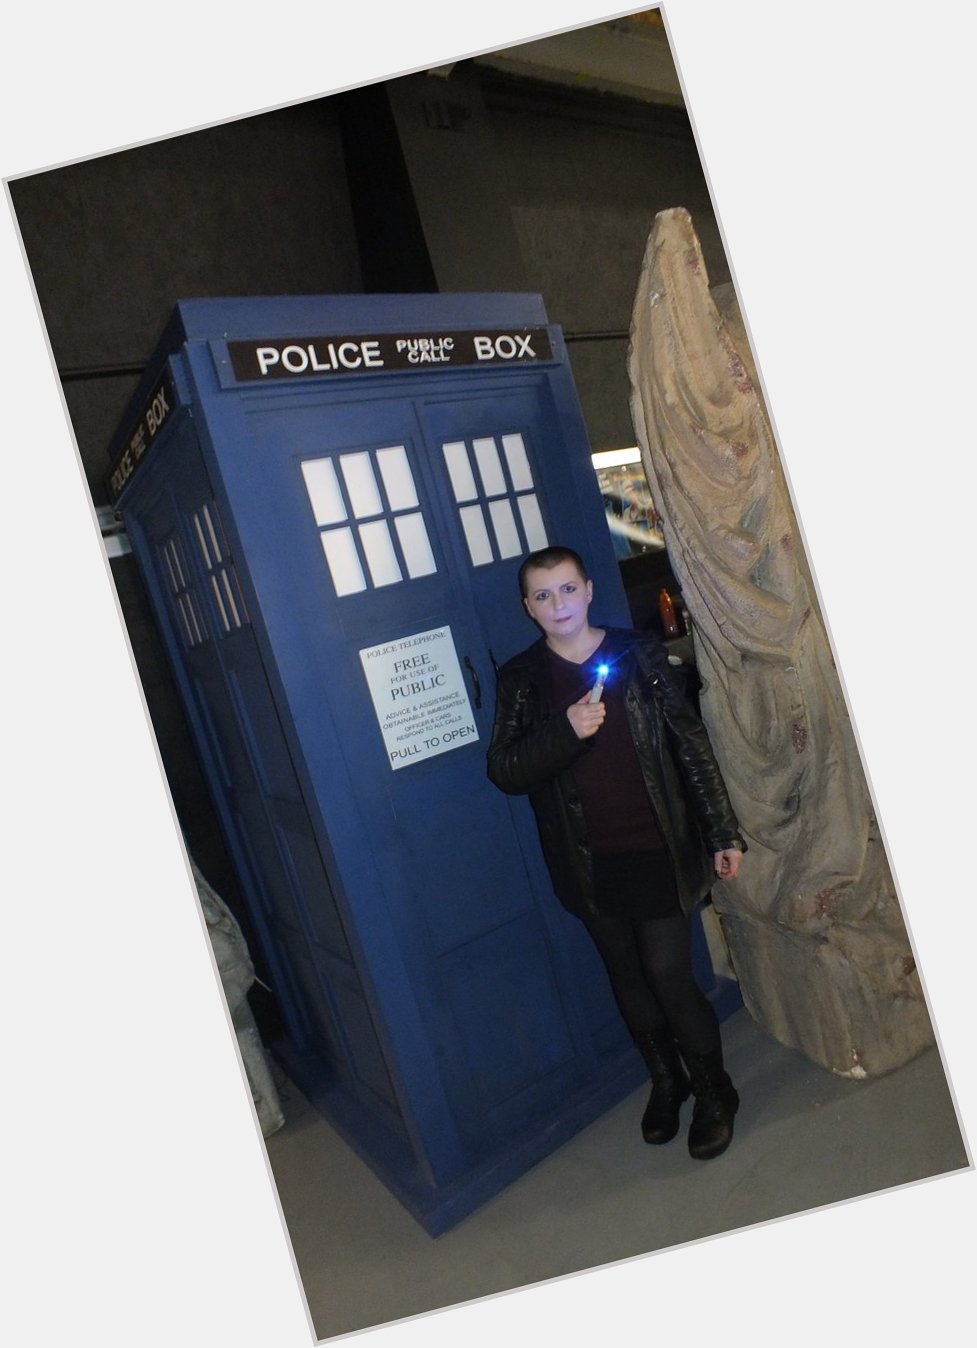 Happy (slightly belated) Birthday Christopher Eccleston! The only Doctor I ve cosplayed (so far). 